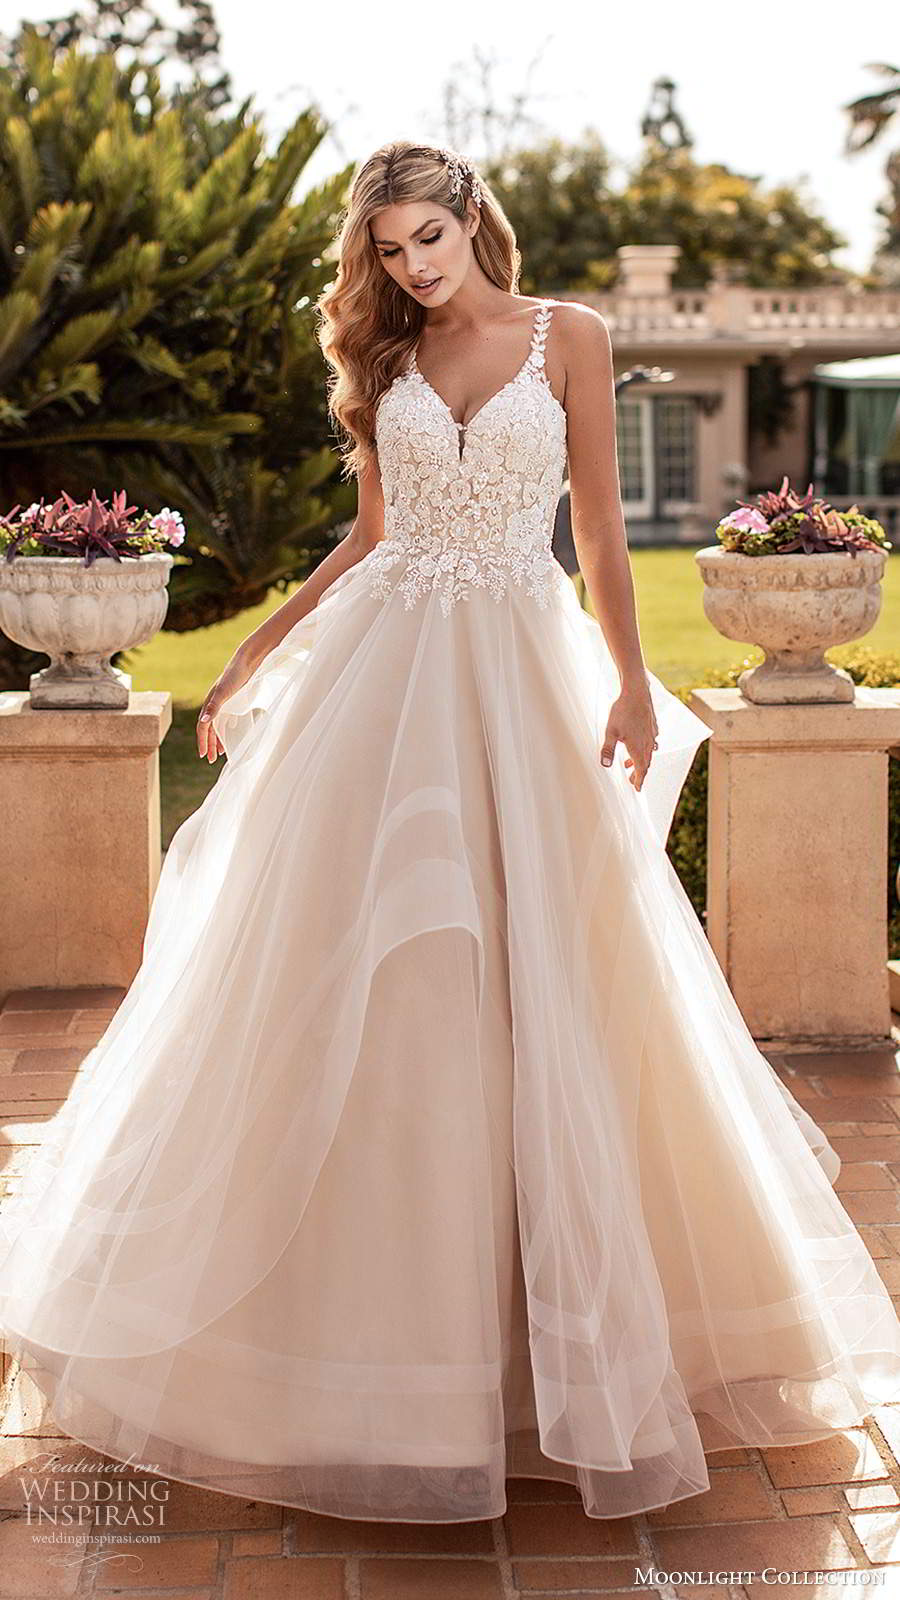 moonlight collection fall 2020 bridal sleeveless beaded straps sweetheart neckline embellished bodice a line ball gown wedding dress tiered skirt chapel train (4) mv